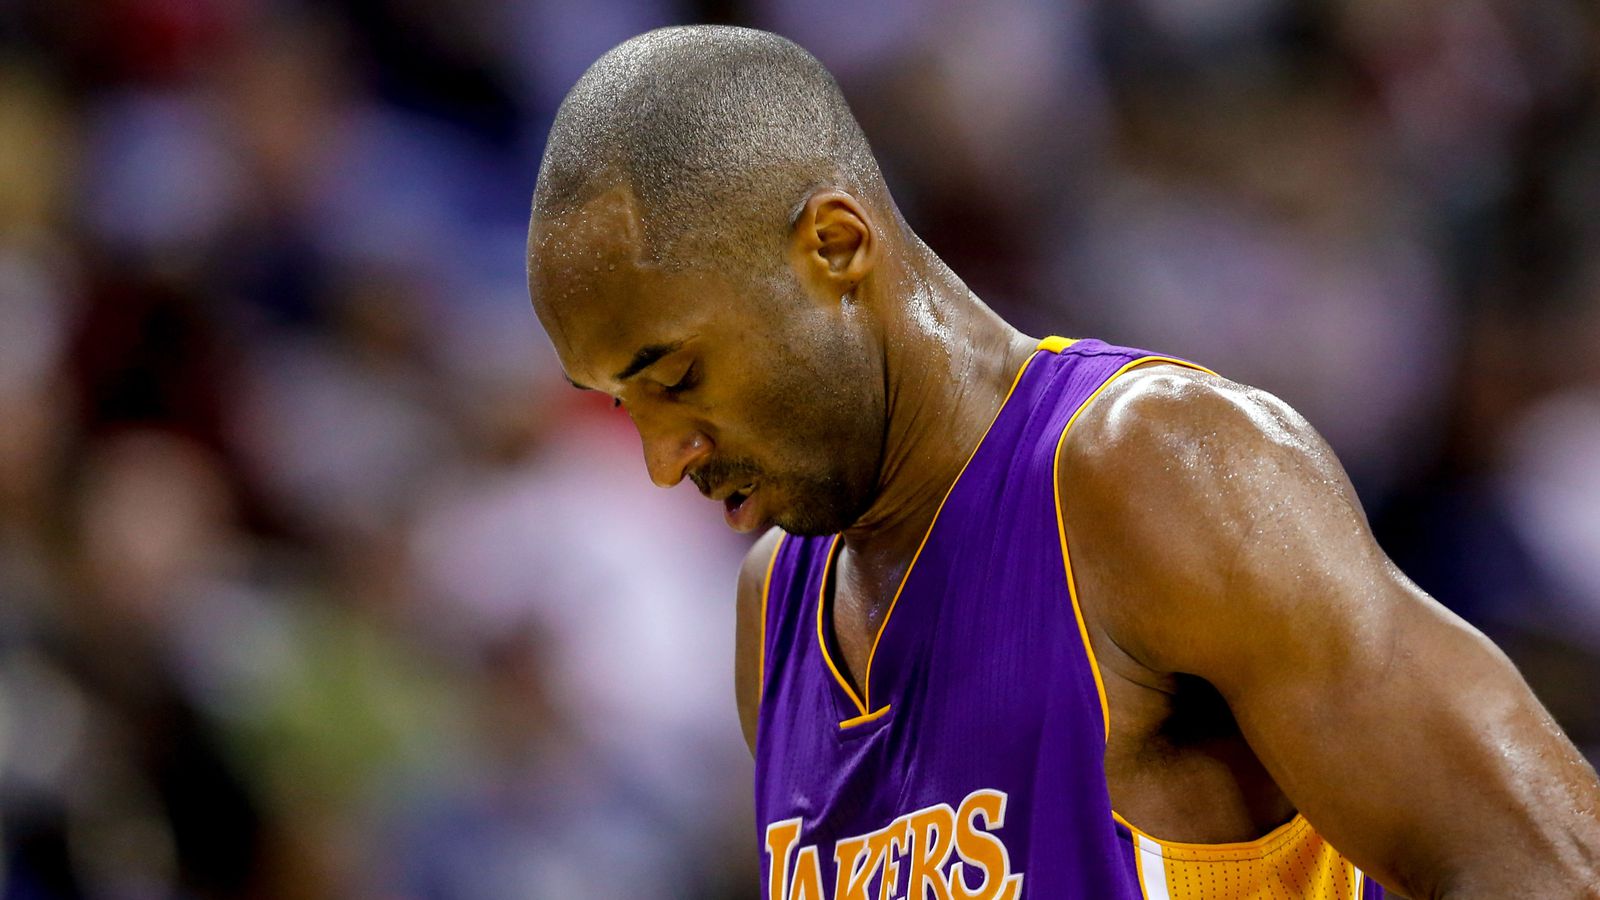 Kobe Bryant set a record for most missed field goals all time this week